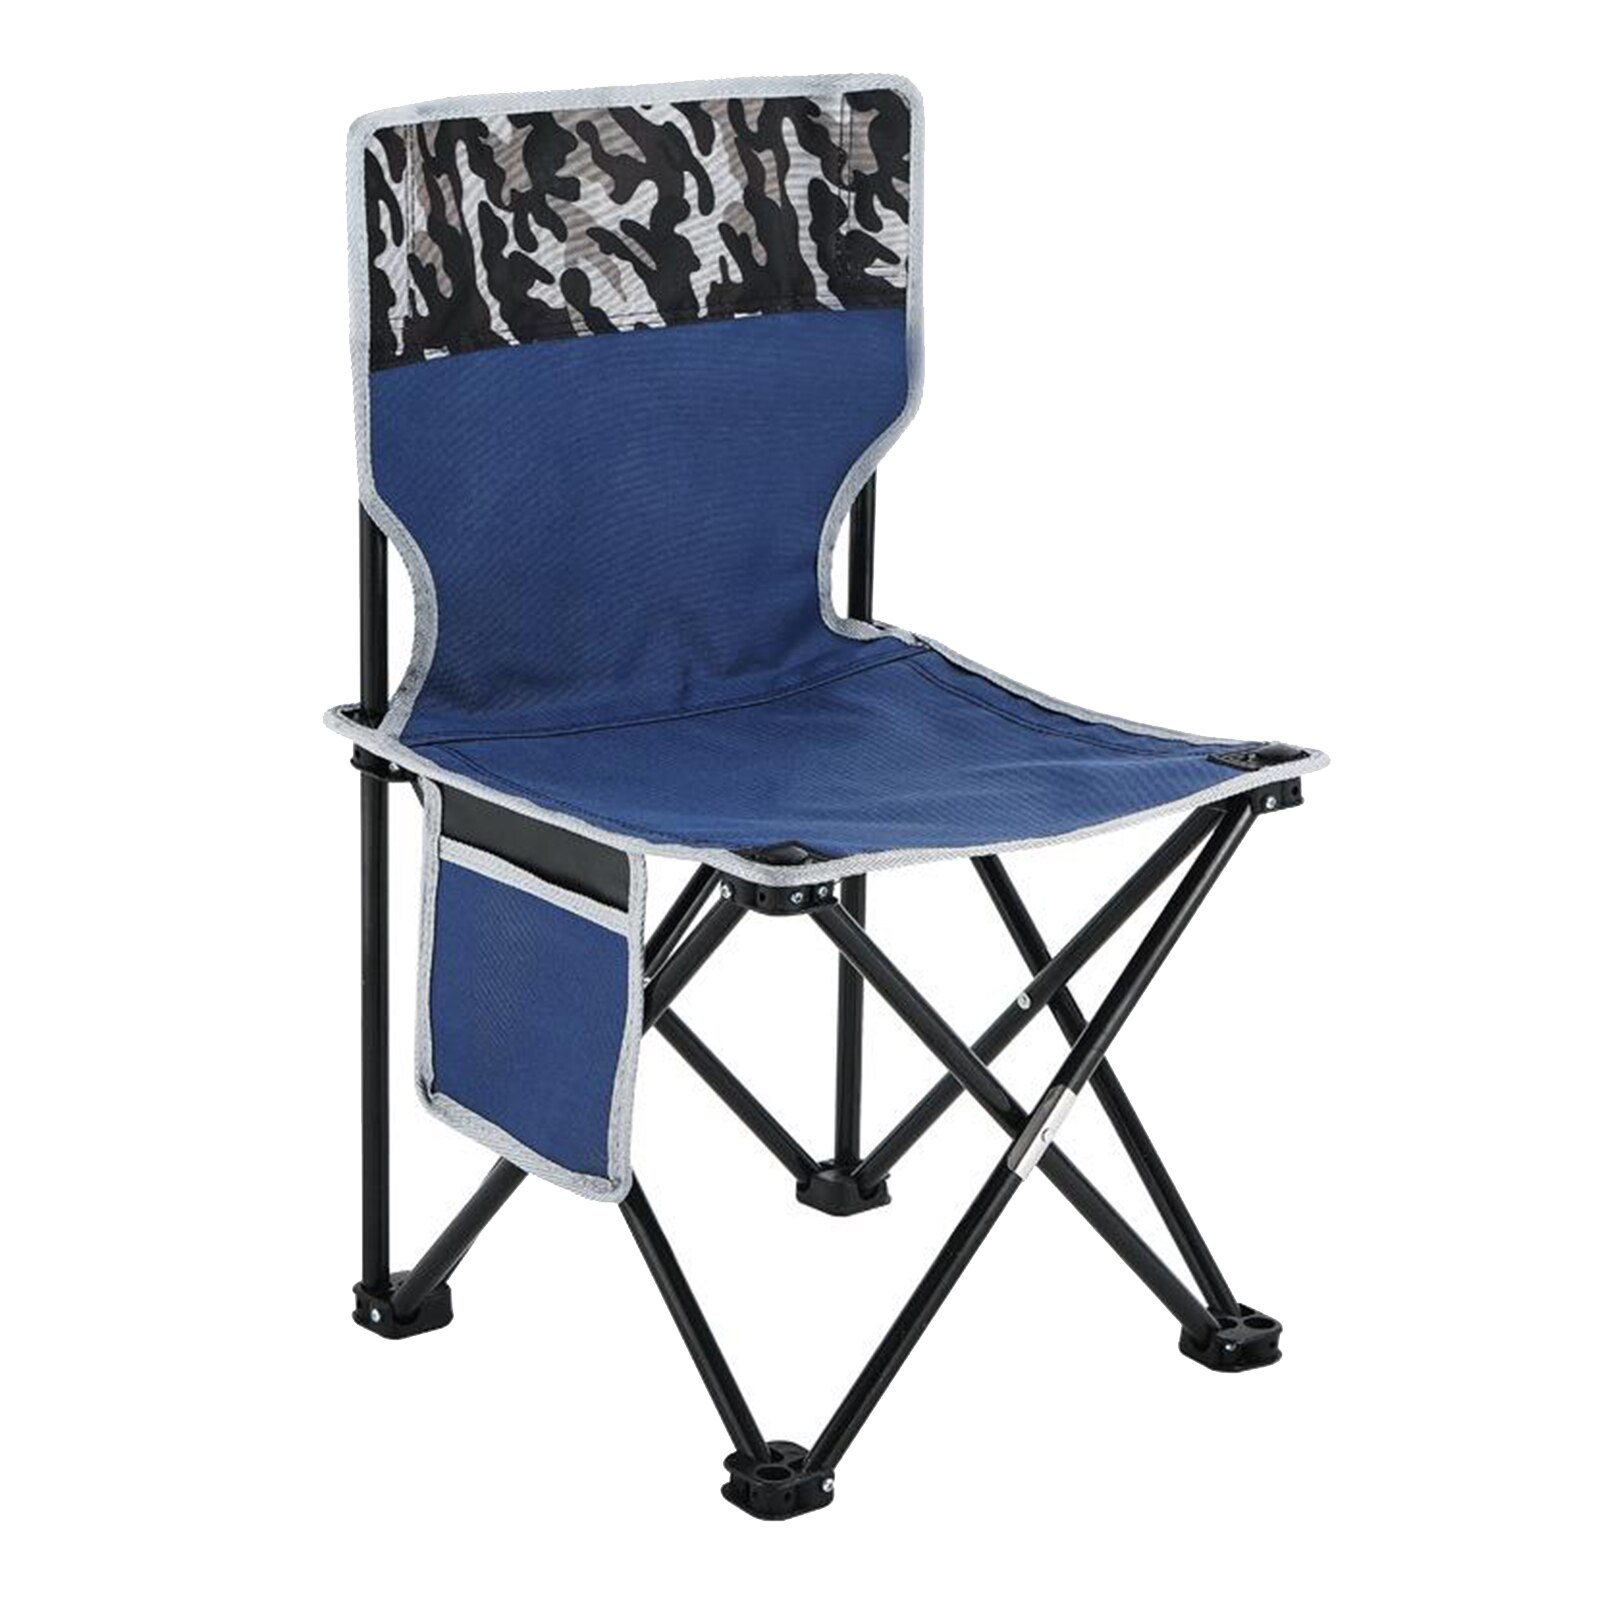 Reinforced Folding Camping Chairs, Foldable Lawn Picnic BBQ Picnic Backrest: Camo S